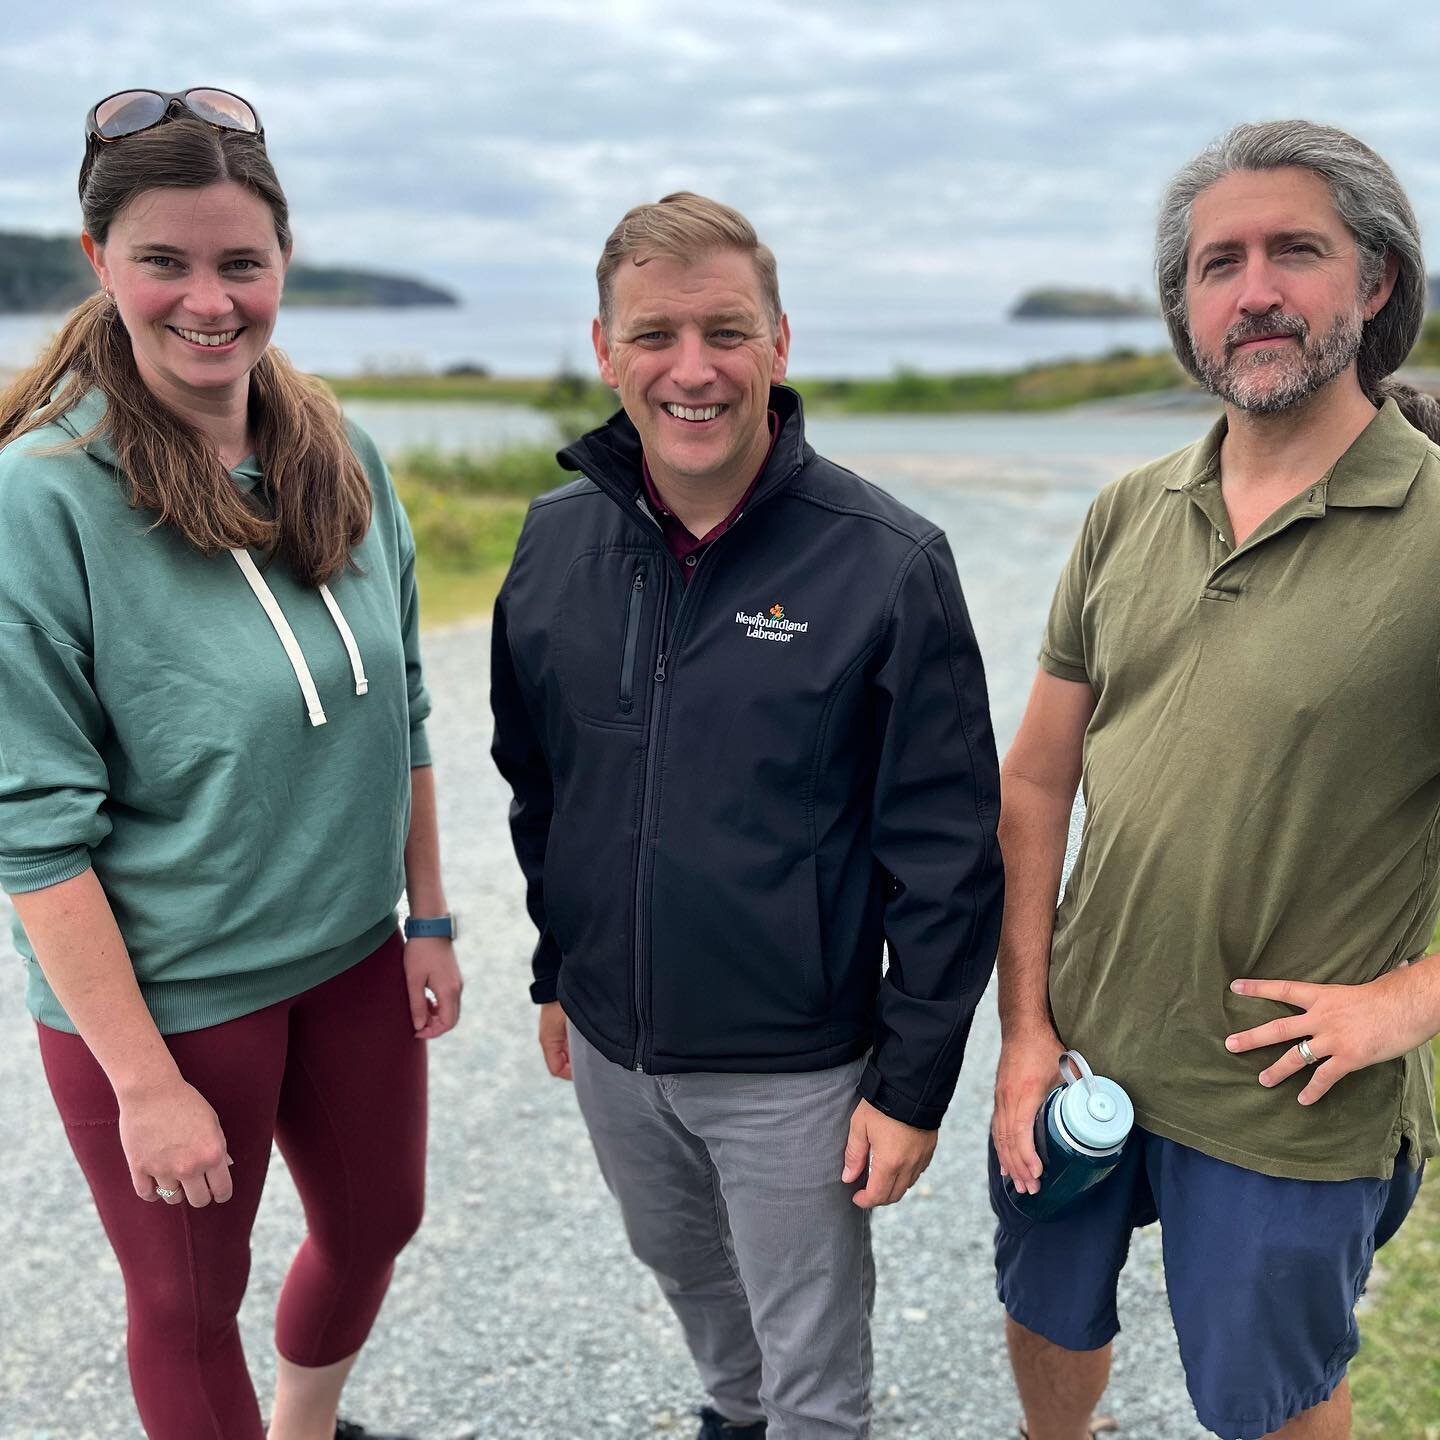 Look who we ran into at @twowhalescoffeeshop in Port Rexton! Had a great chat about #yearoftheartsnl. Thanks for your support! @andrewfurey 

#nlpremier #nlarts